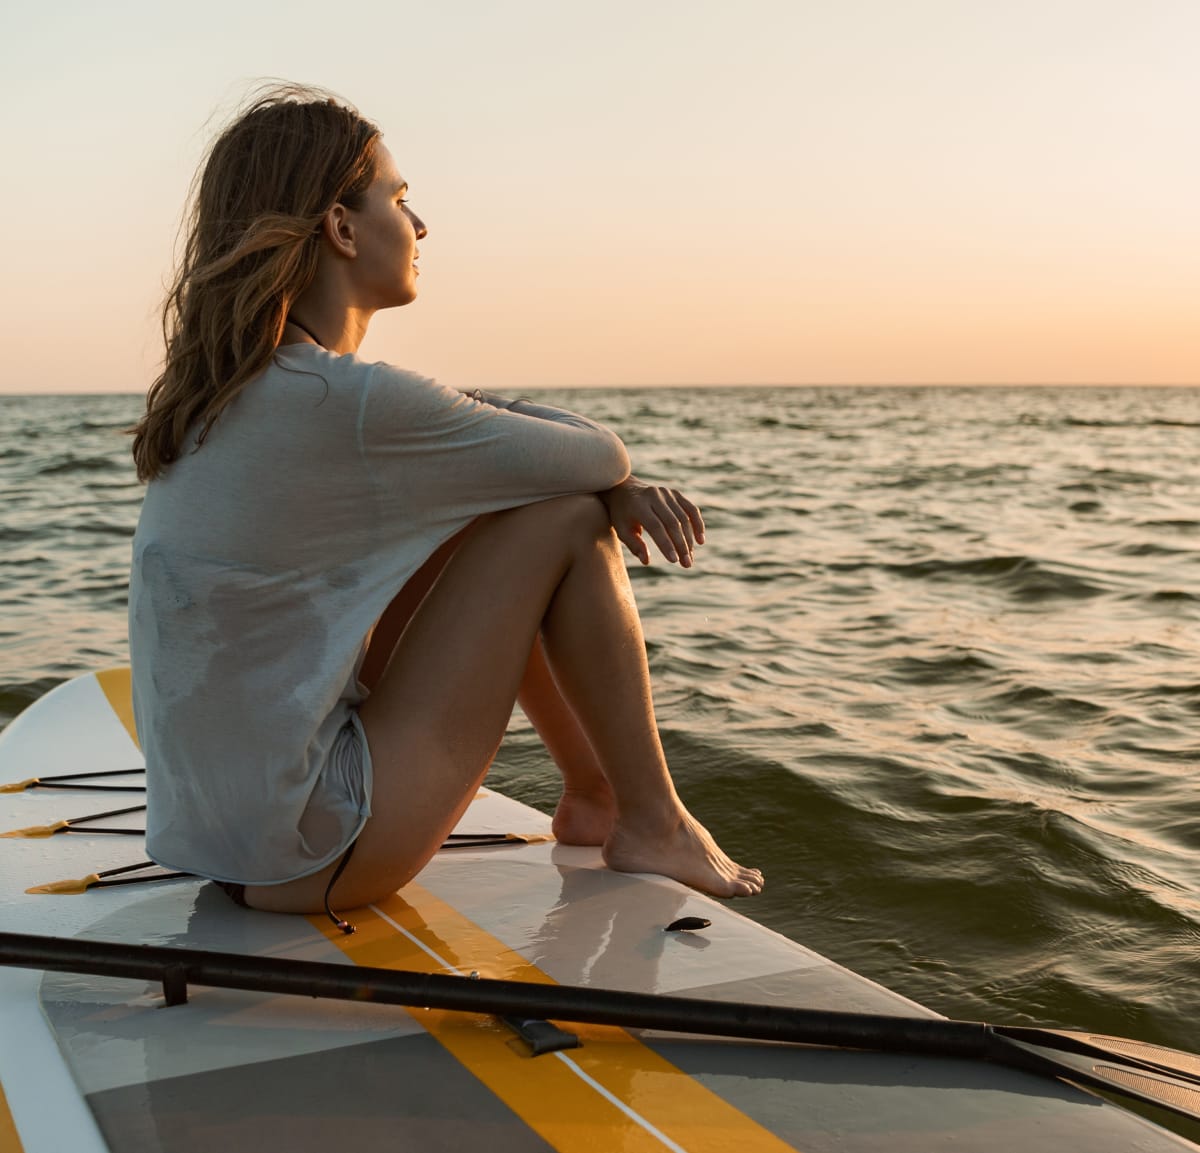 Girl sitting on paddleboard on ocean looking at sunset